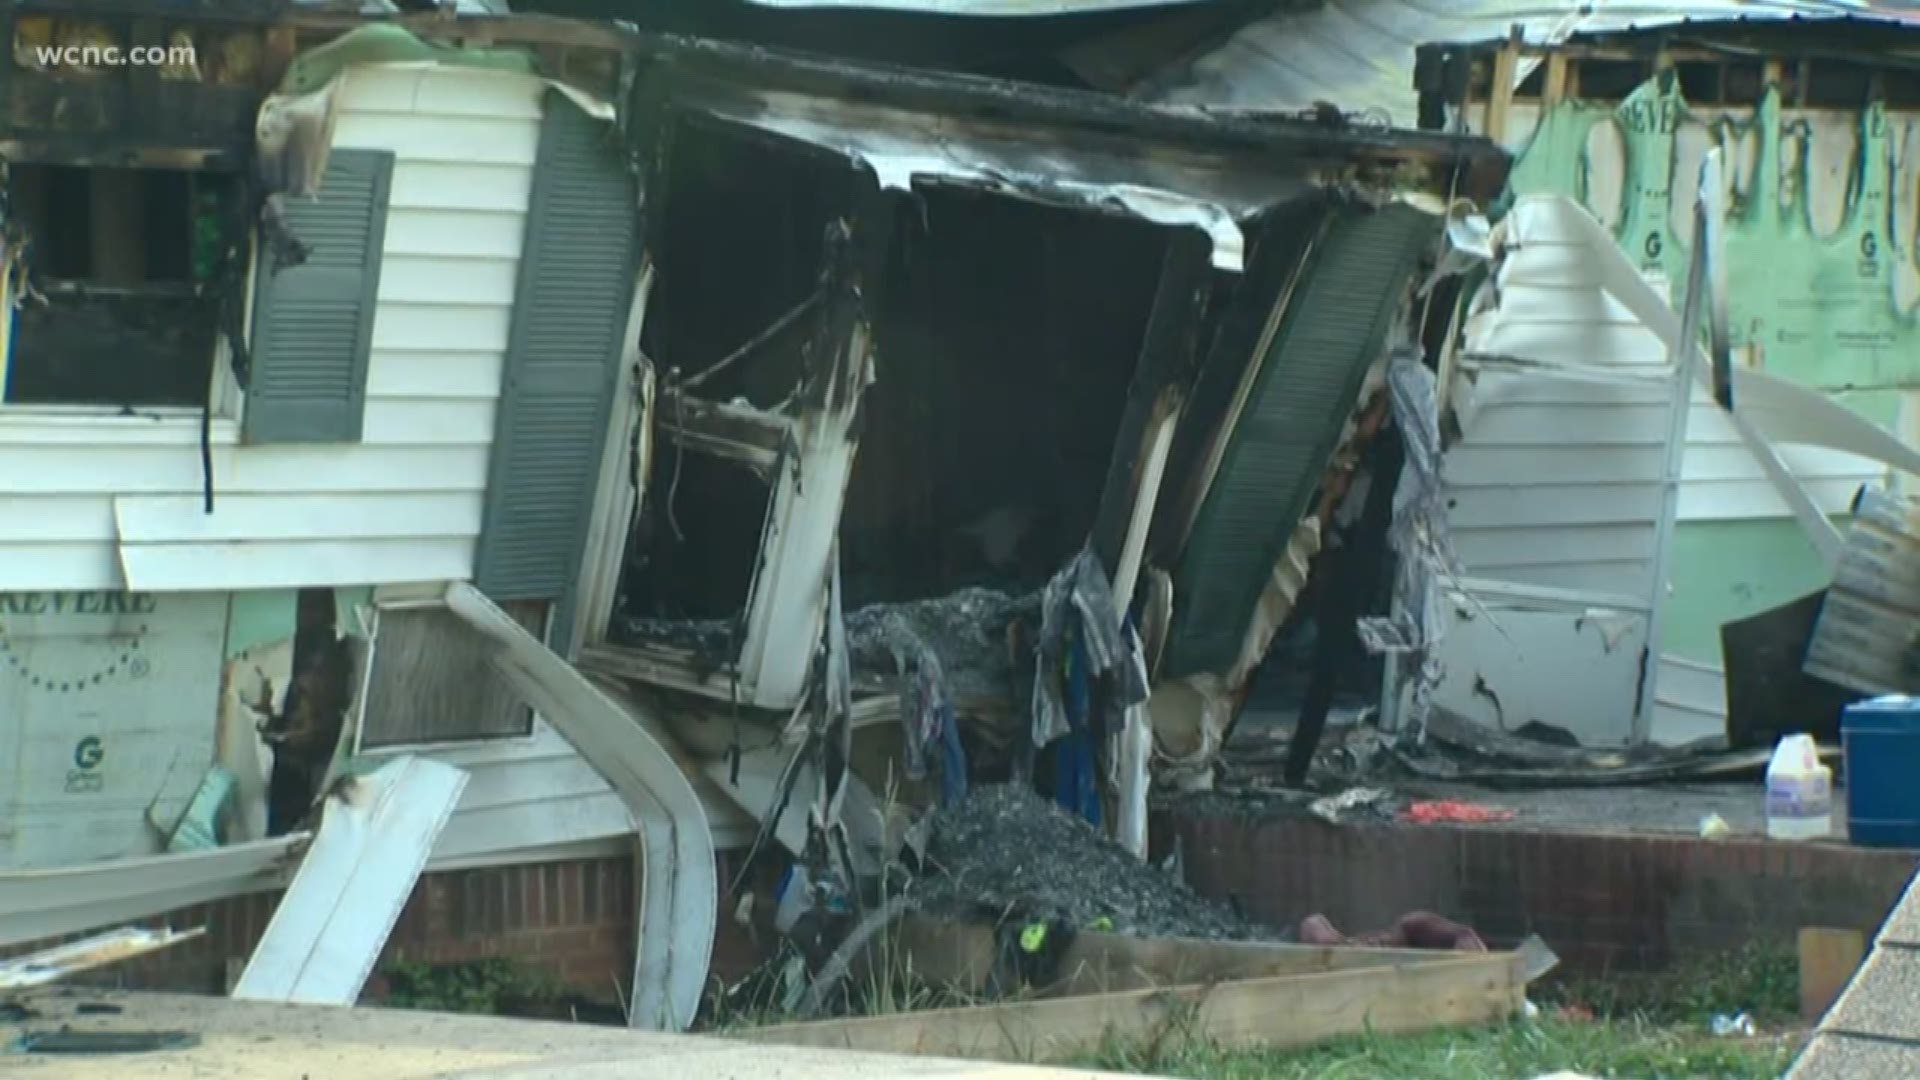 The Alexander County Sheriff's Office is investigating a house fire where two people were found dead inside. The fire happened off Pine Meadows Lane in Taylorsville around 11:30 p.m. Saturday. Officials say the two bodies were burned beyond recognition.